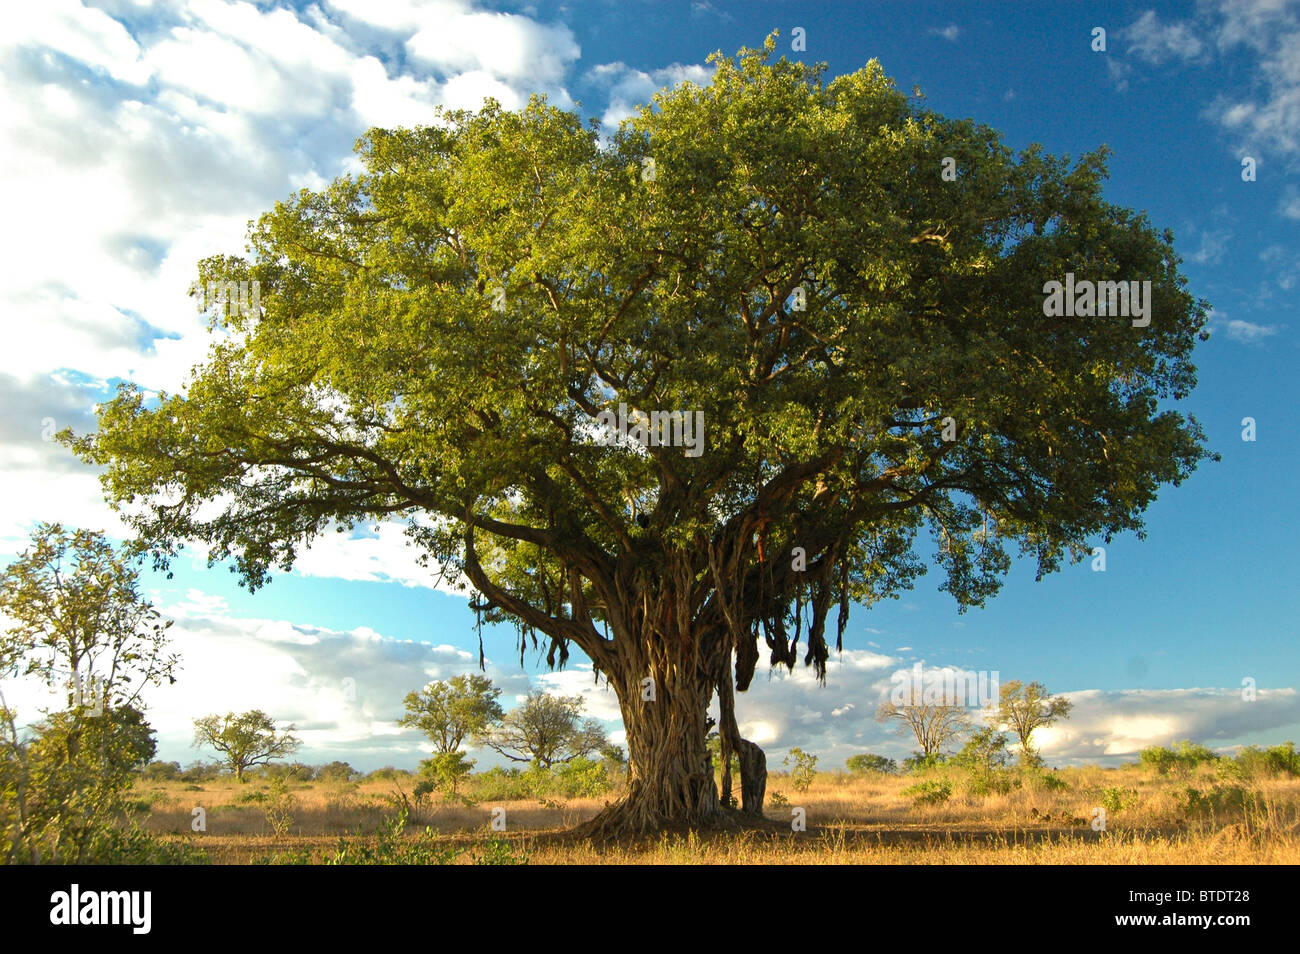 Large fig tree in a savanna setting Stock Photo